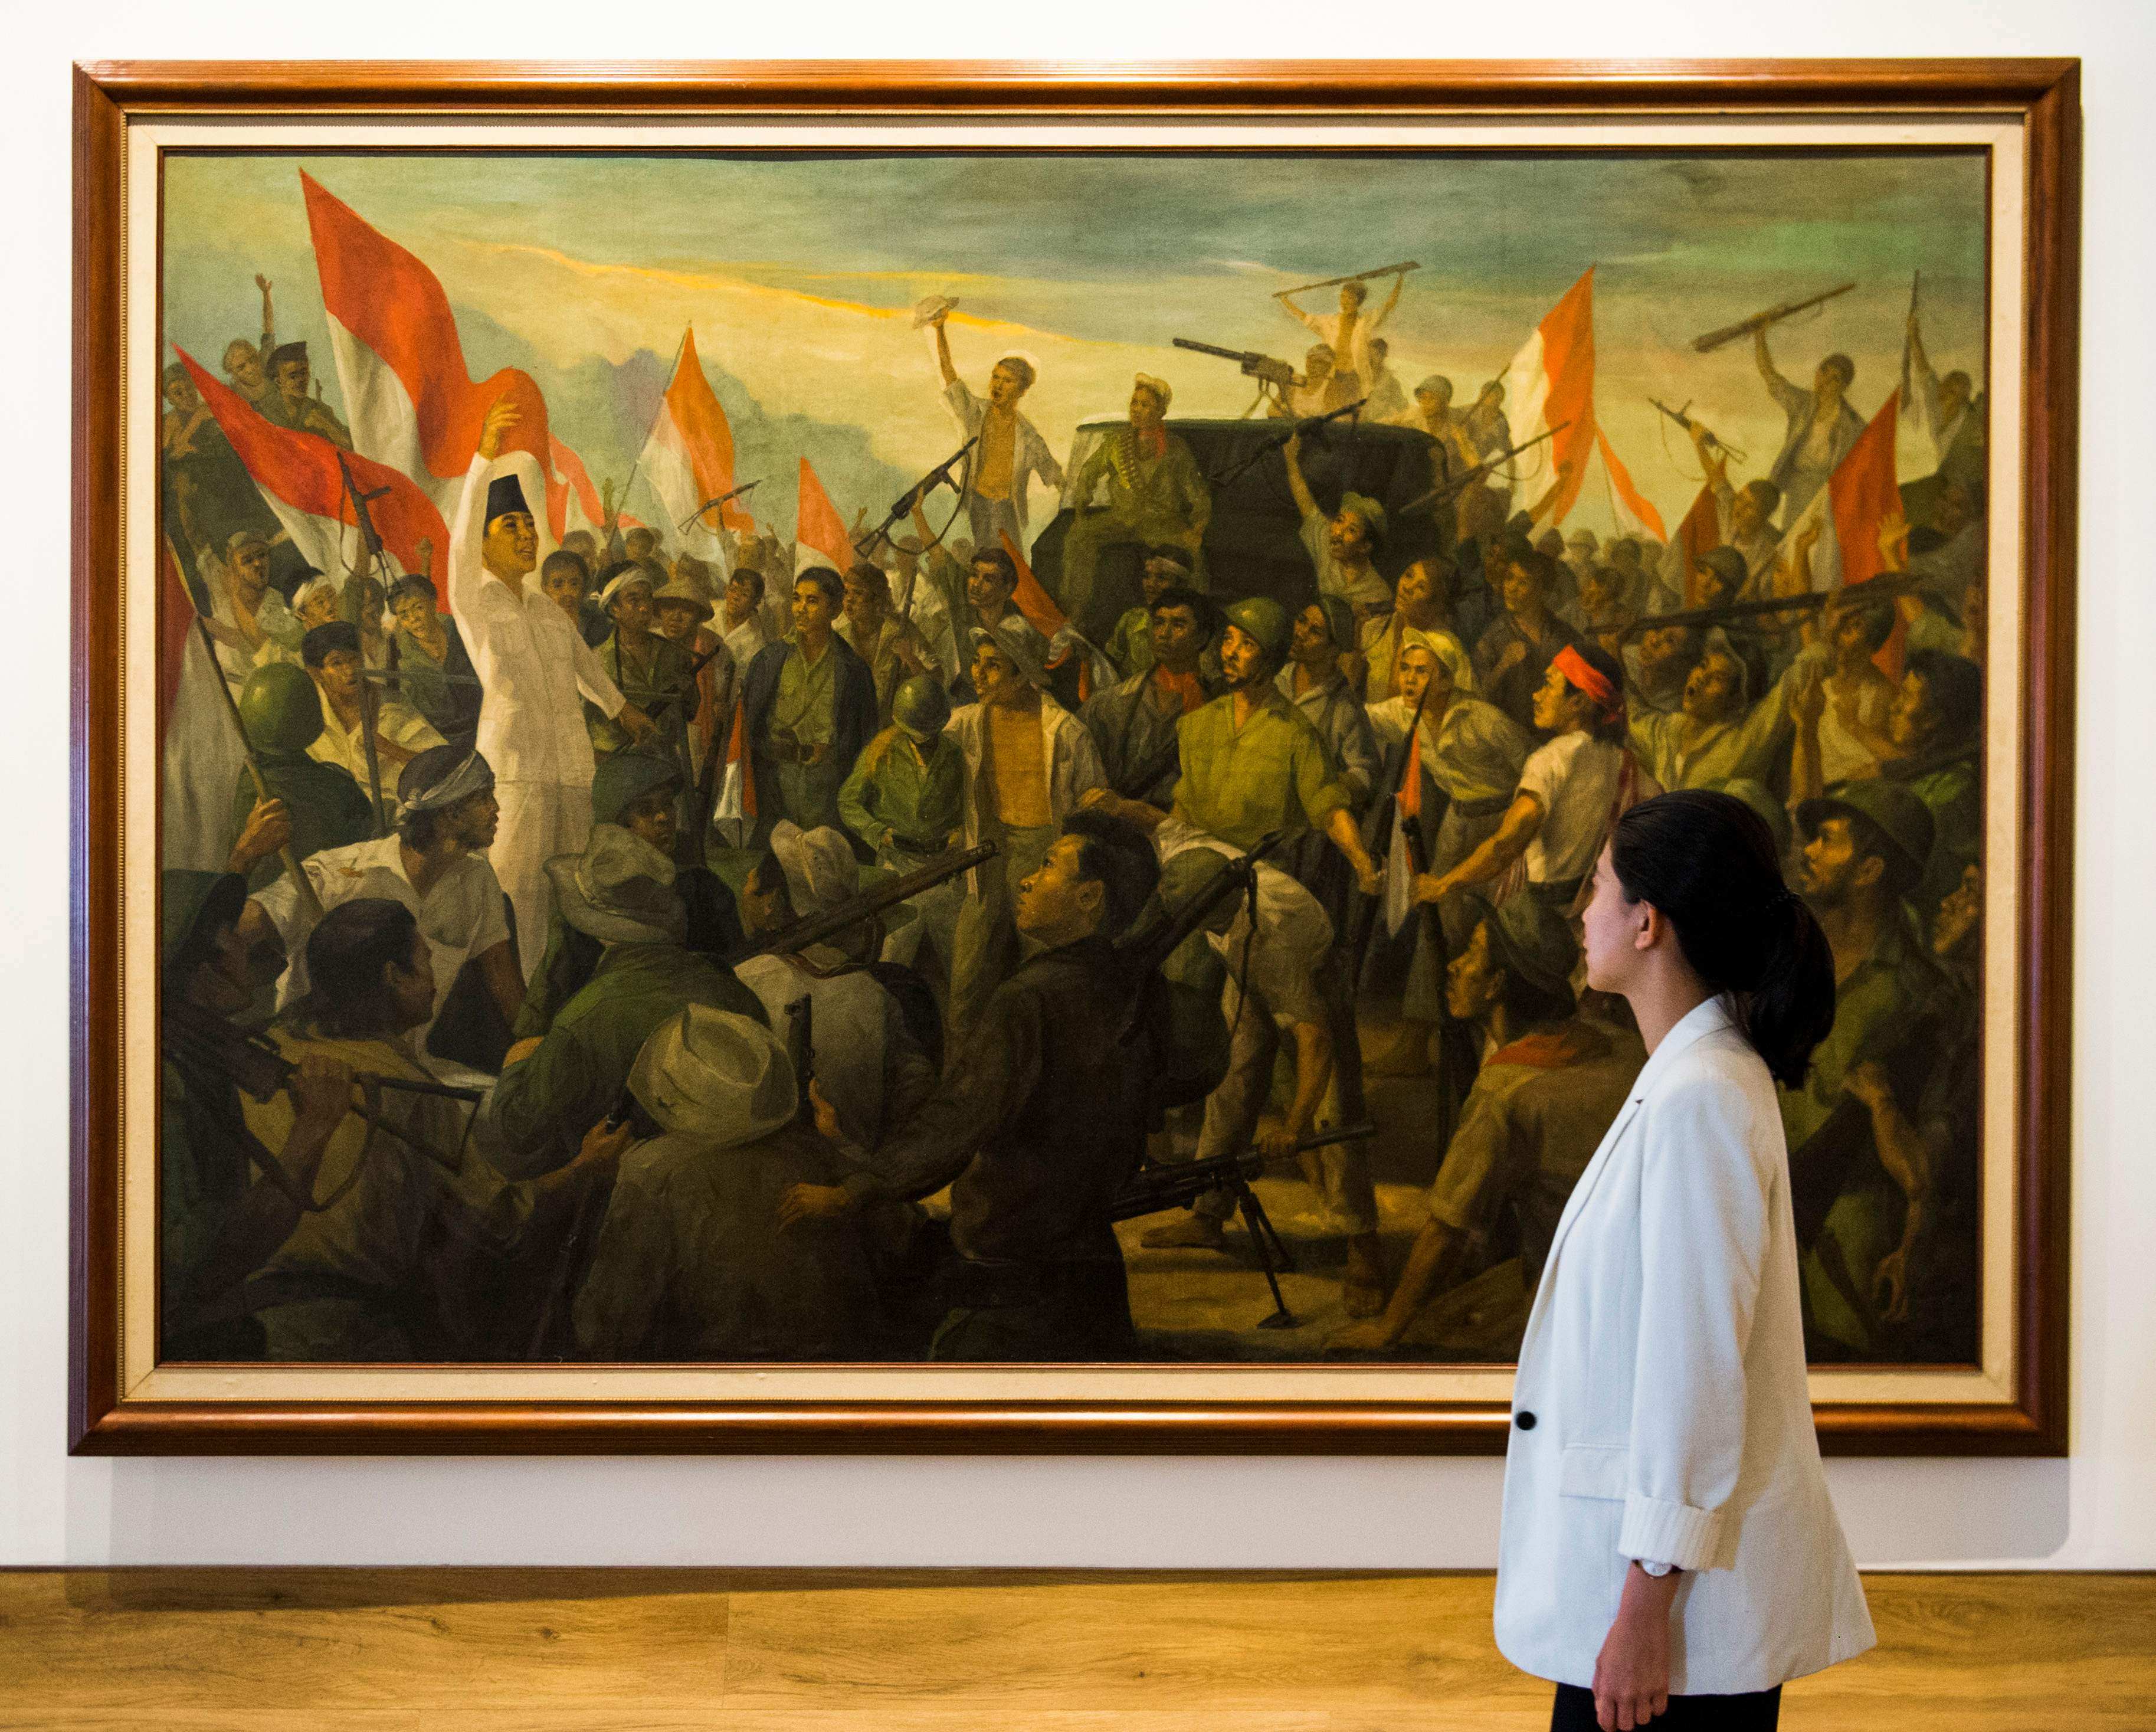 A woman walks past a painting titled ‘Revolutionary War’ at the Museum of Modern and Contemporary Art in Jakarta. Indonesian museums, especially in the provinces, are ill-equipped to handle the relics arriving from the Netherlands, experts say. Photo: AFP